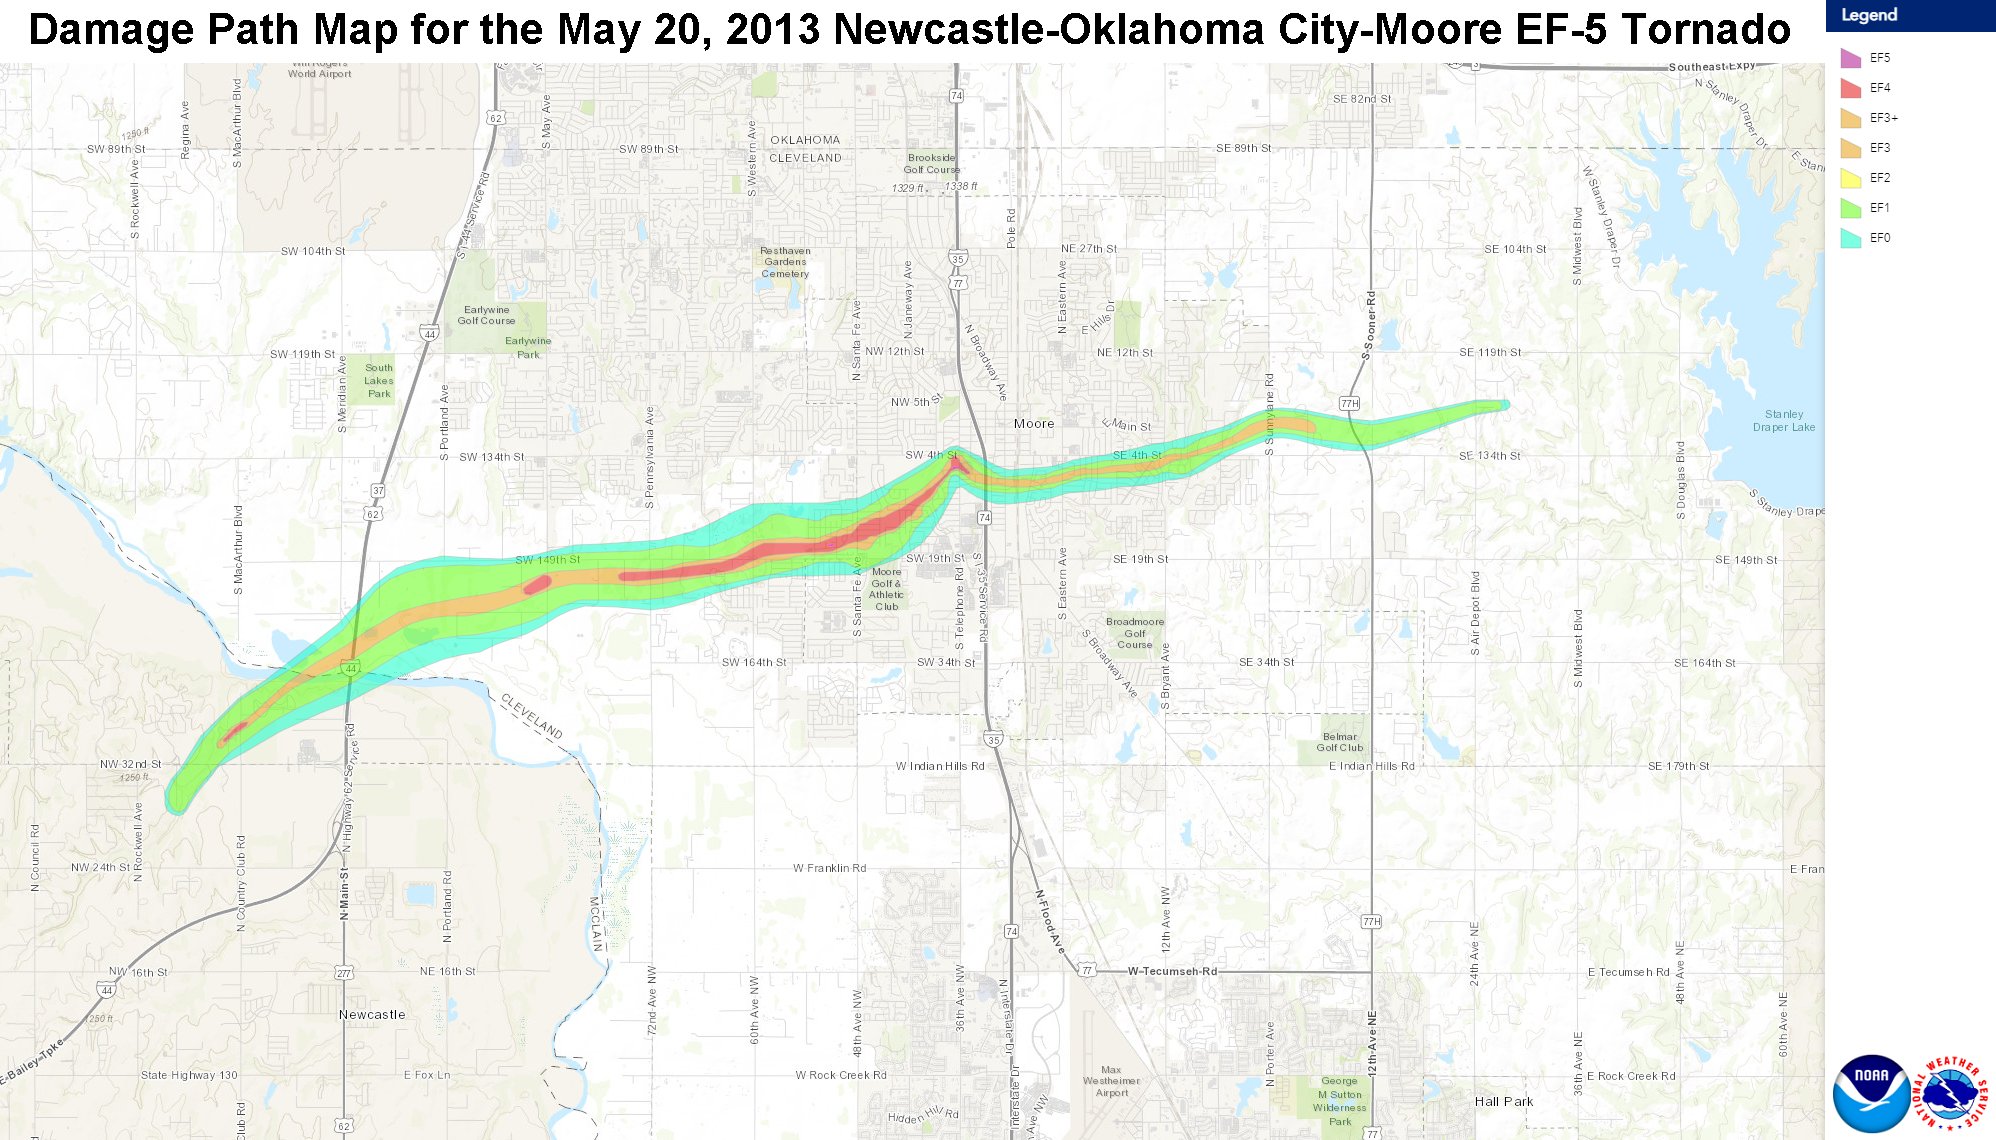 EF Scale Damage Contours of the May 20, 2013 Newcastle-South OKC-Moore EF-5 Tornado